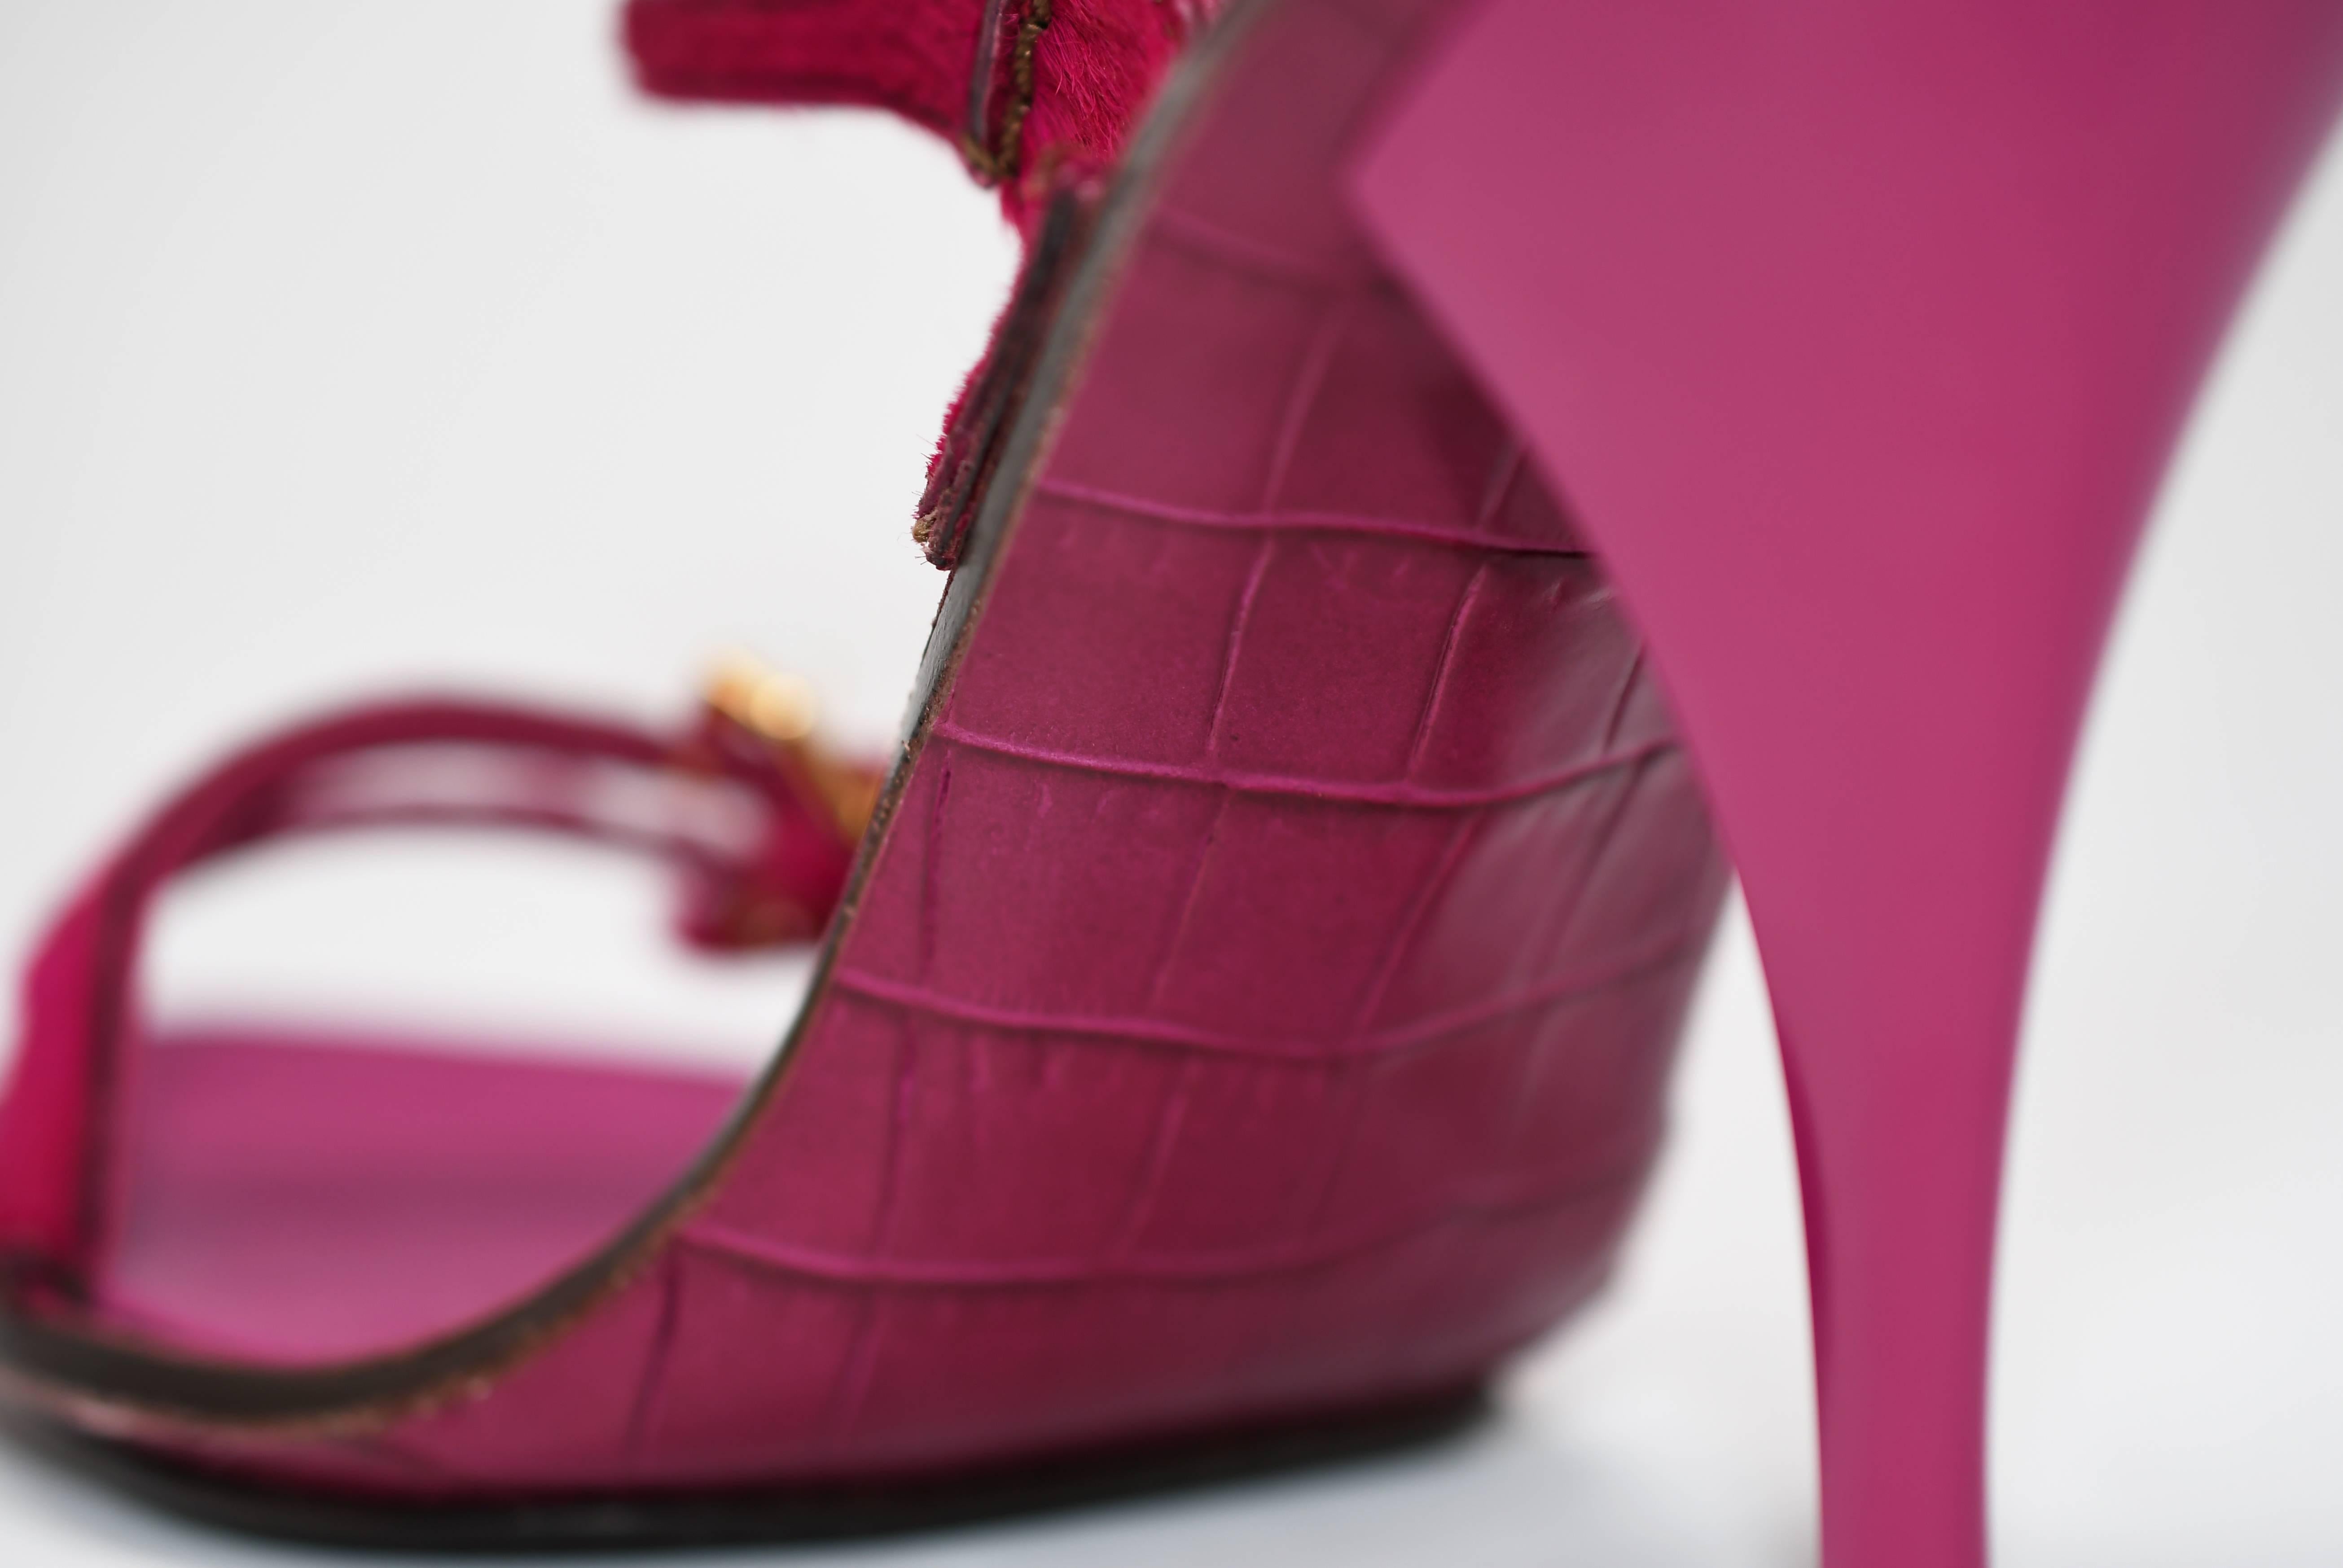 Pink Louis Vuitton Fuchsia Sandal Heel with Alligator Embossed Sole, Size 38 For Sale